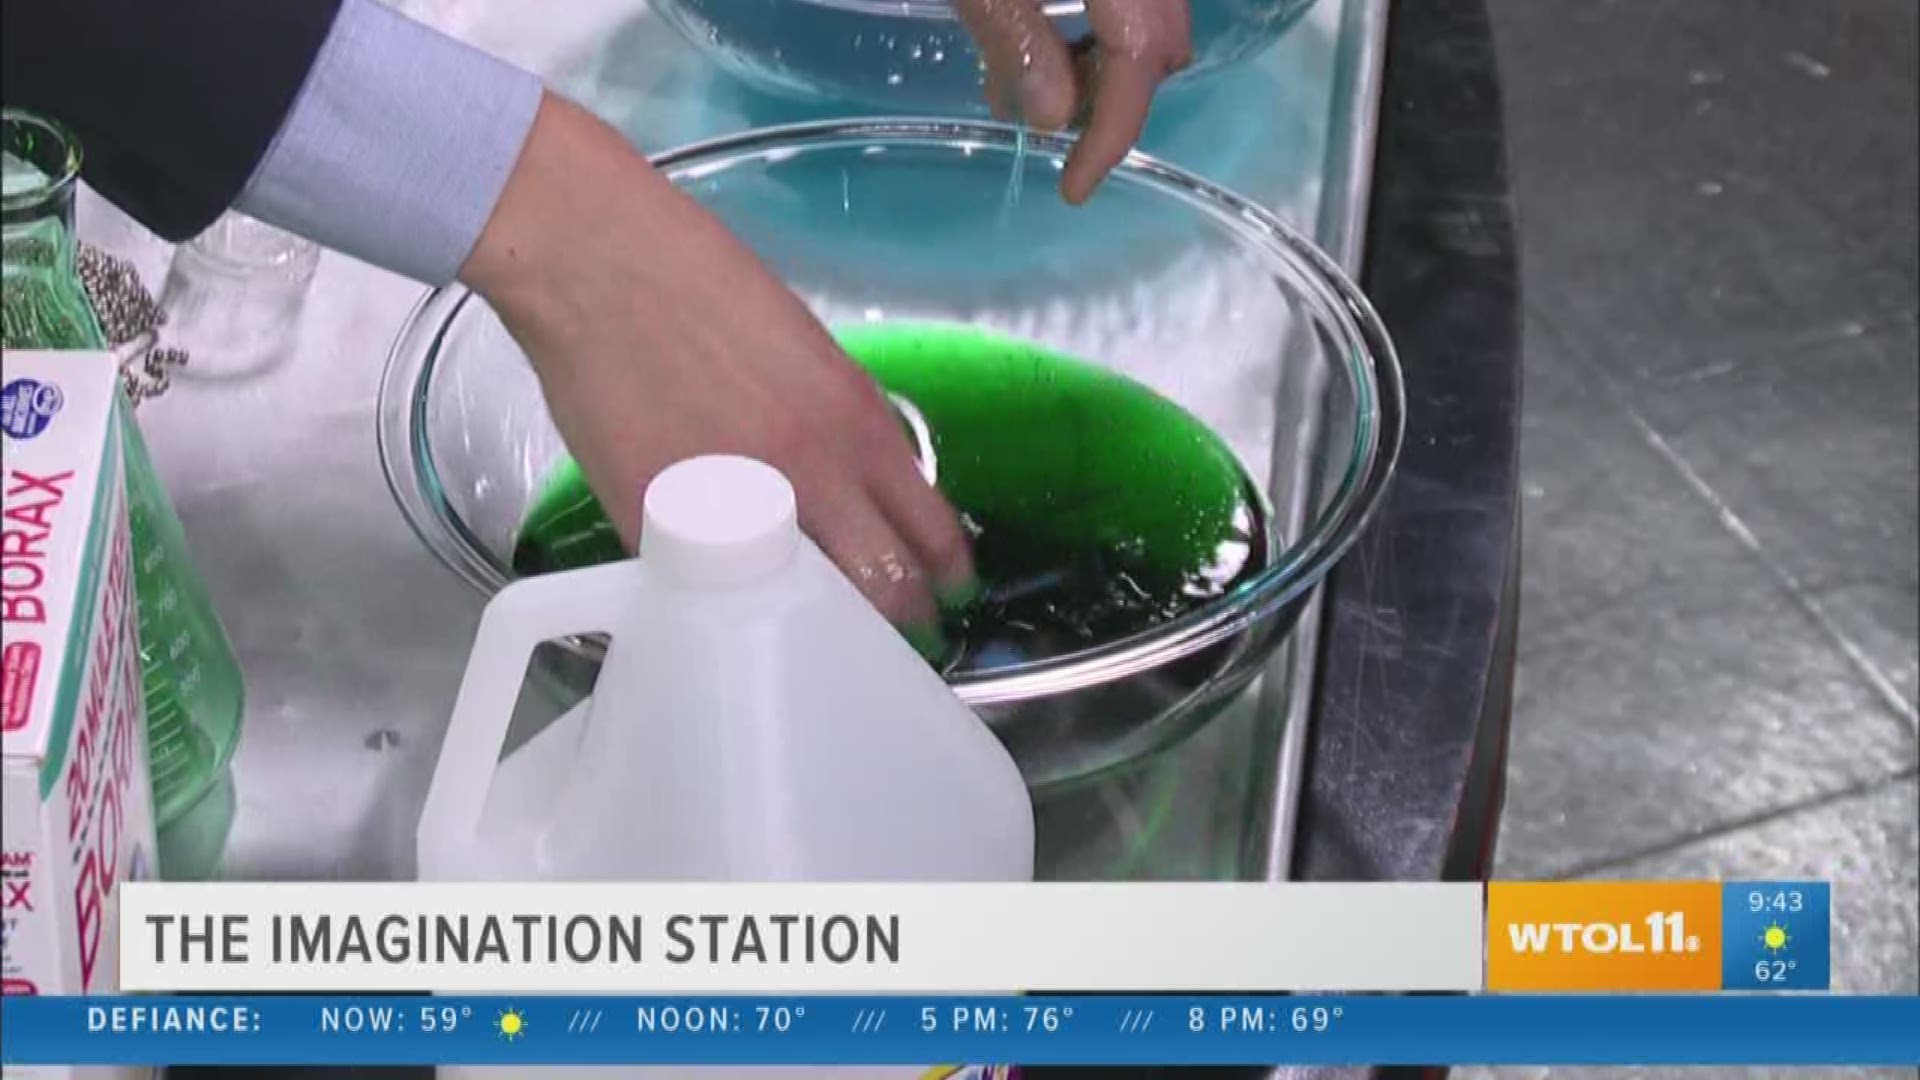 Pumpkins and slime, sounds like the perfect Halloween combo! You can experiment with both at Imagination Station.